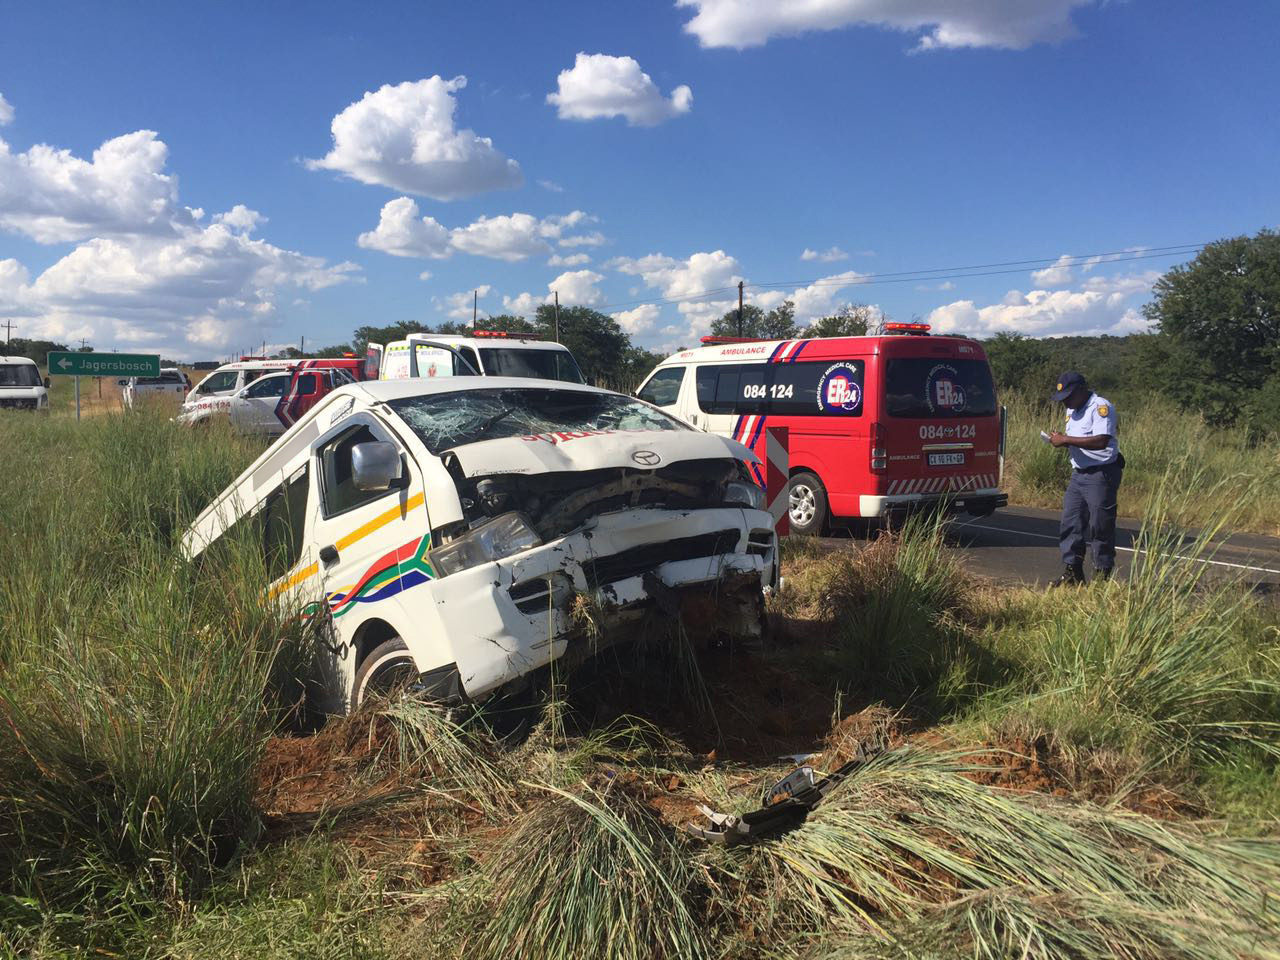 Taxi rolls injuring 6 people in Fochville